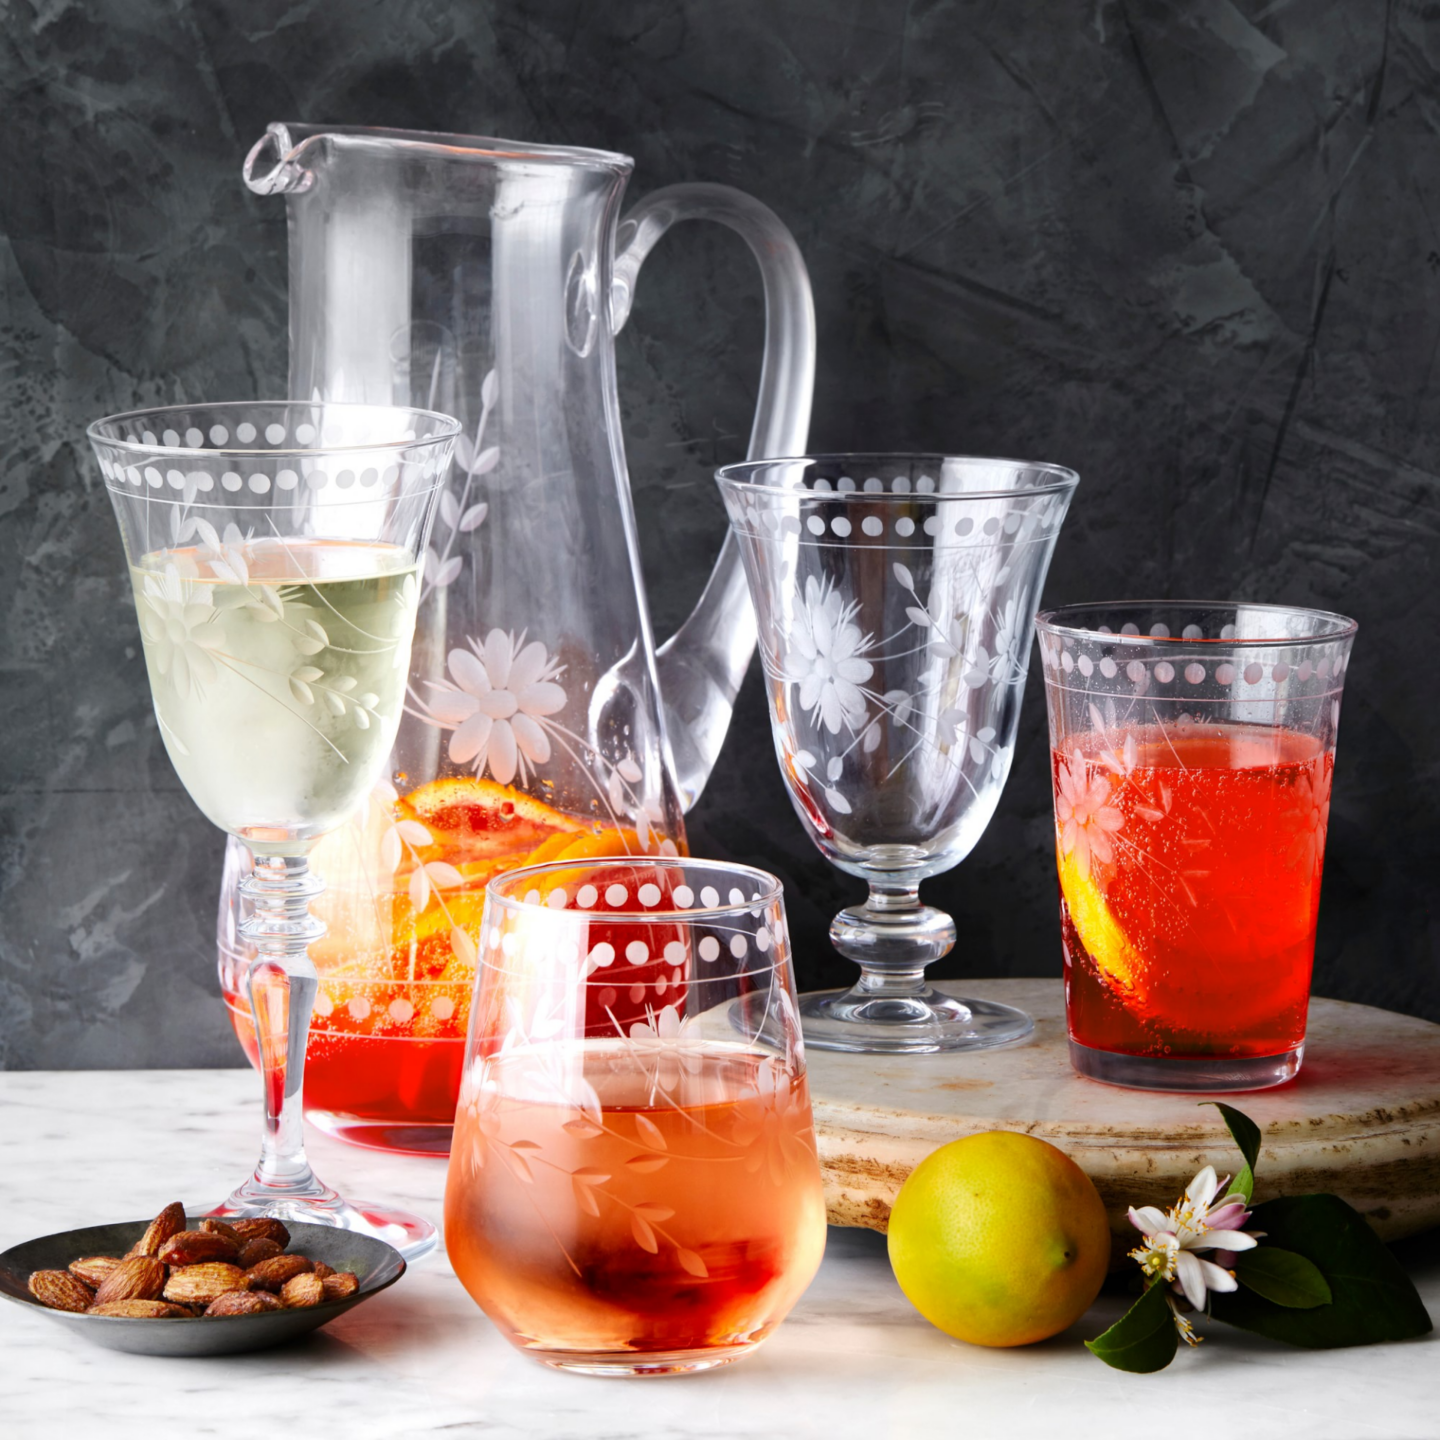 Gorgeous vintage etched tumblers and drinkware from Williams-Sonoma.